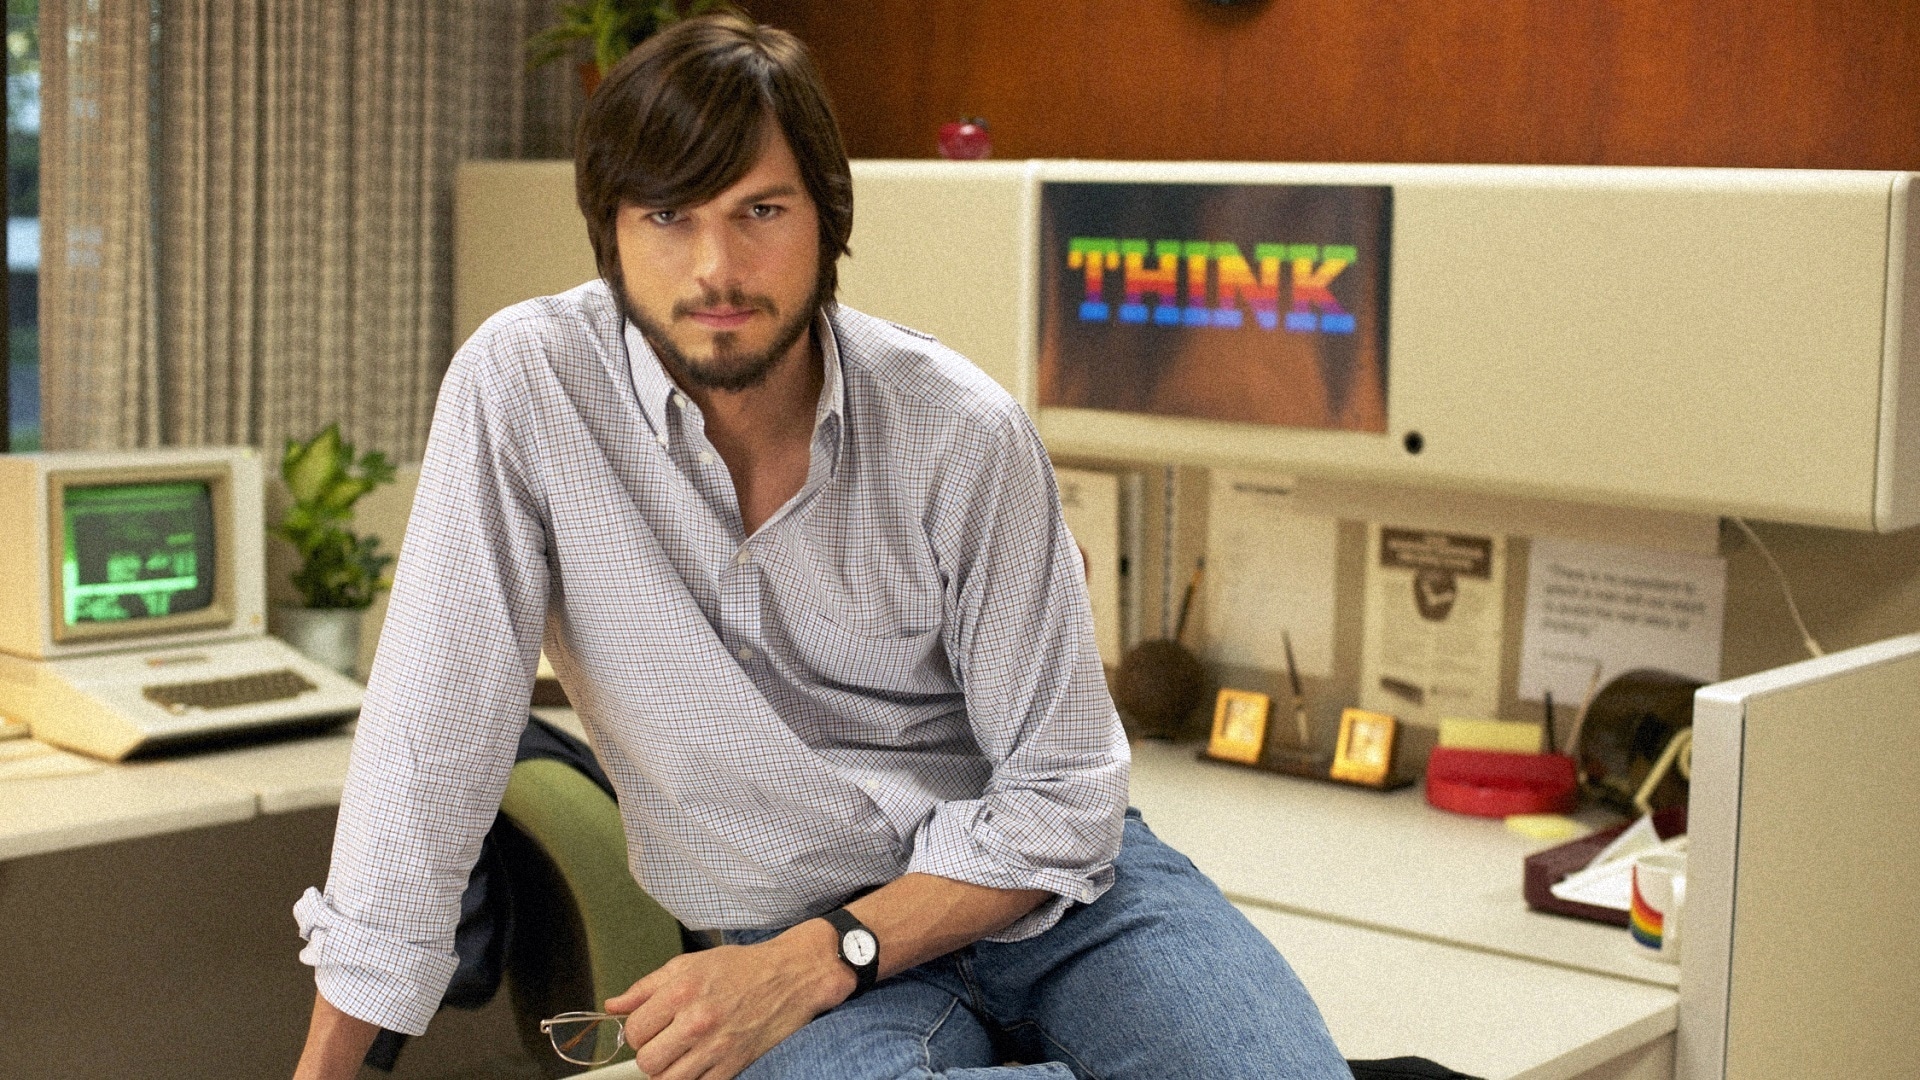 “JOBS” by Ashton Kutcher and a BBC documentary about Steve Jobs are now on Brazilian Netflix